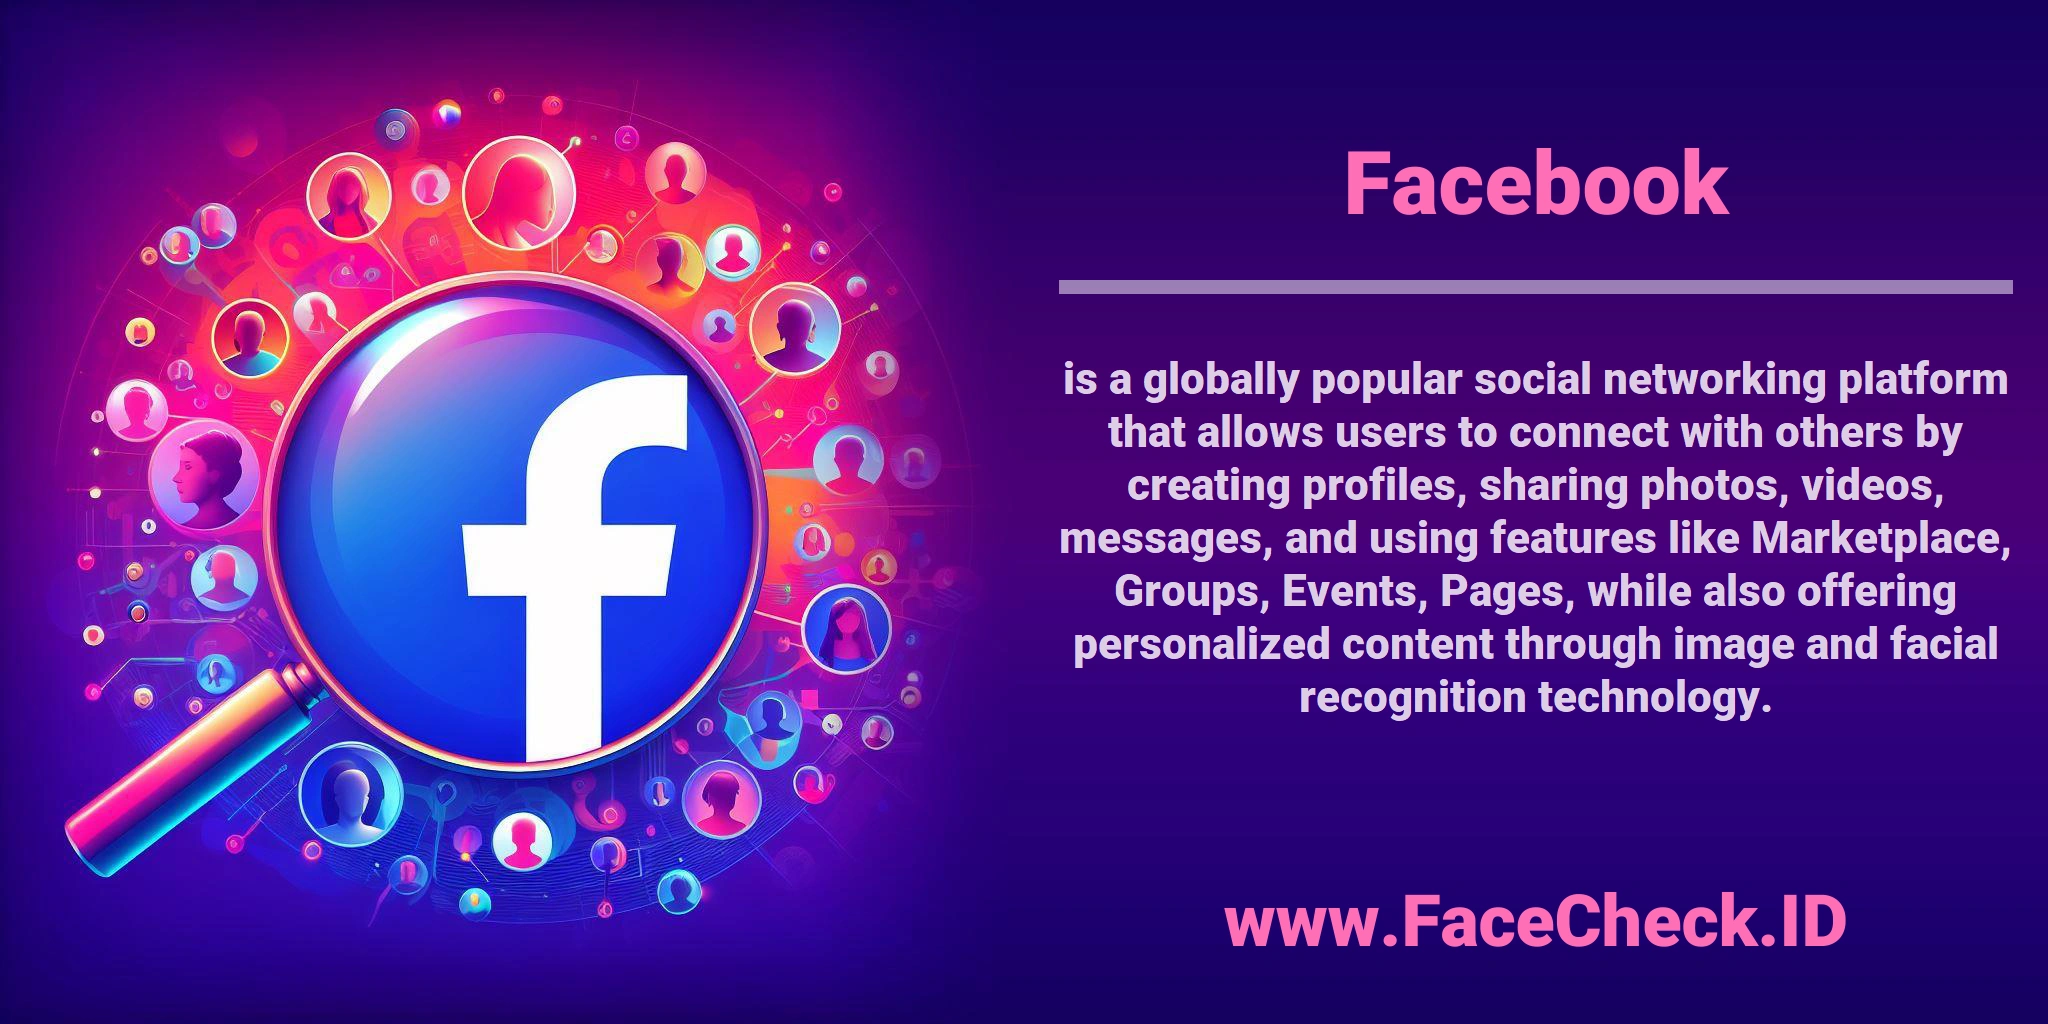 <b>Facebook</b> is a globally popular social networking platform that allows users to connect with others by creating profiles, sharing photos, videos, messages, and using features like Marketplace, Groups, Events, Pages, while also offering personalized content through image and facial recognition technology.
